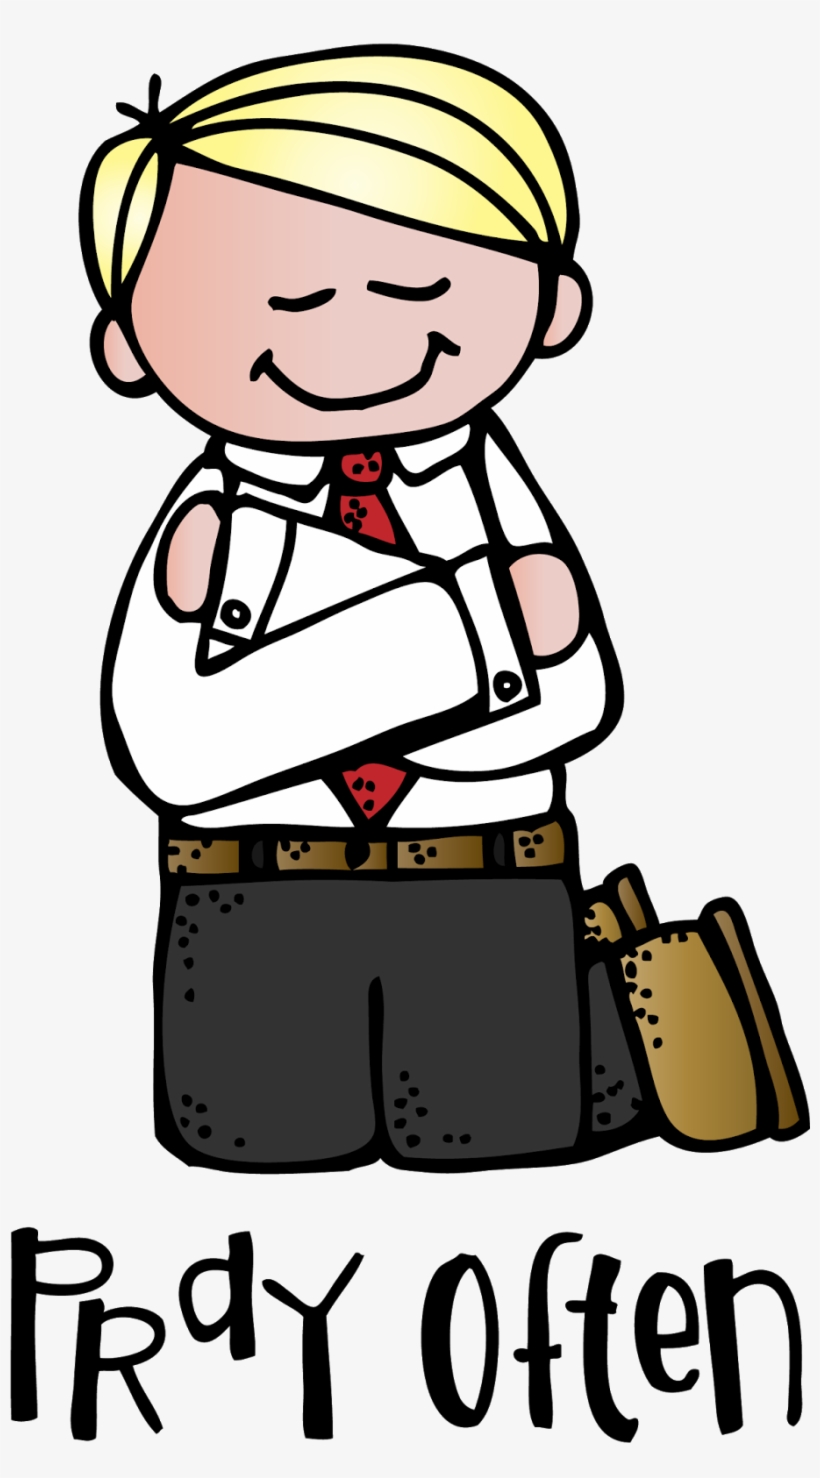 lds clipart father